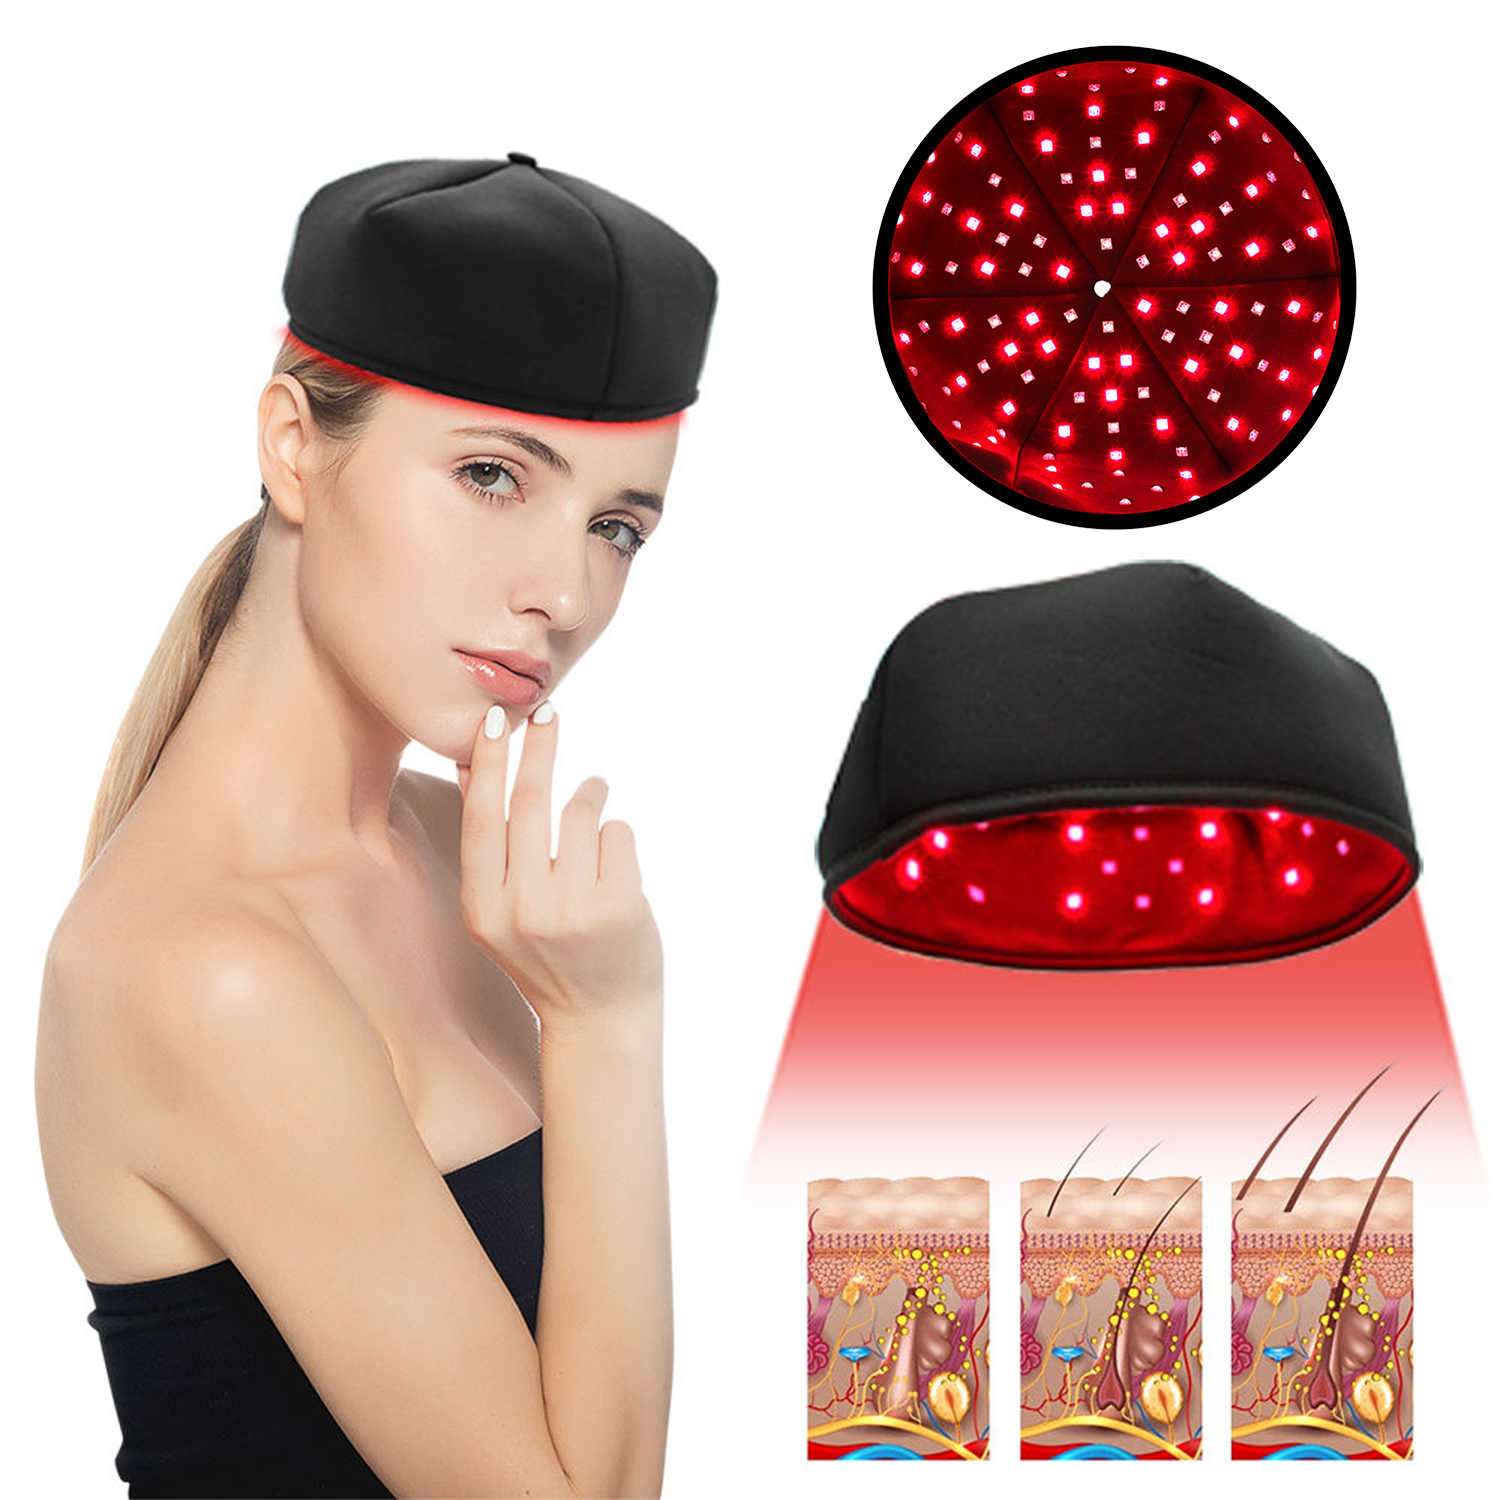 red light therapy hat